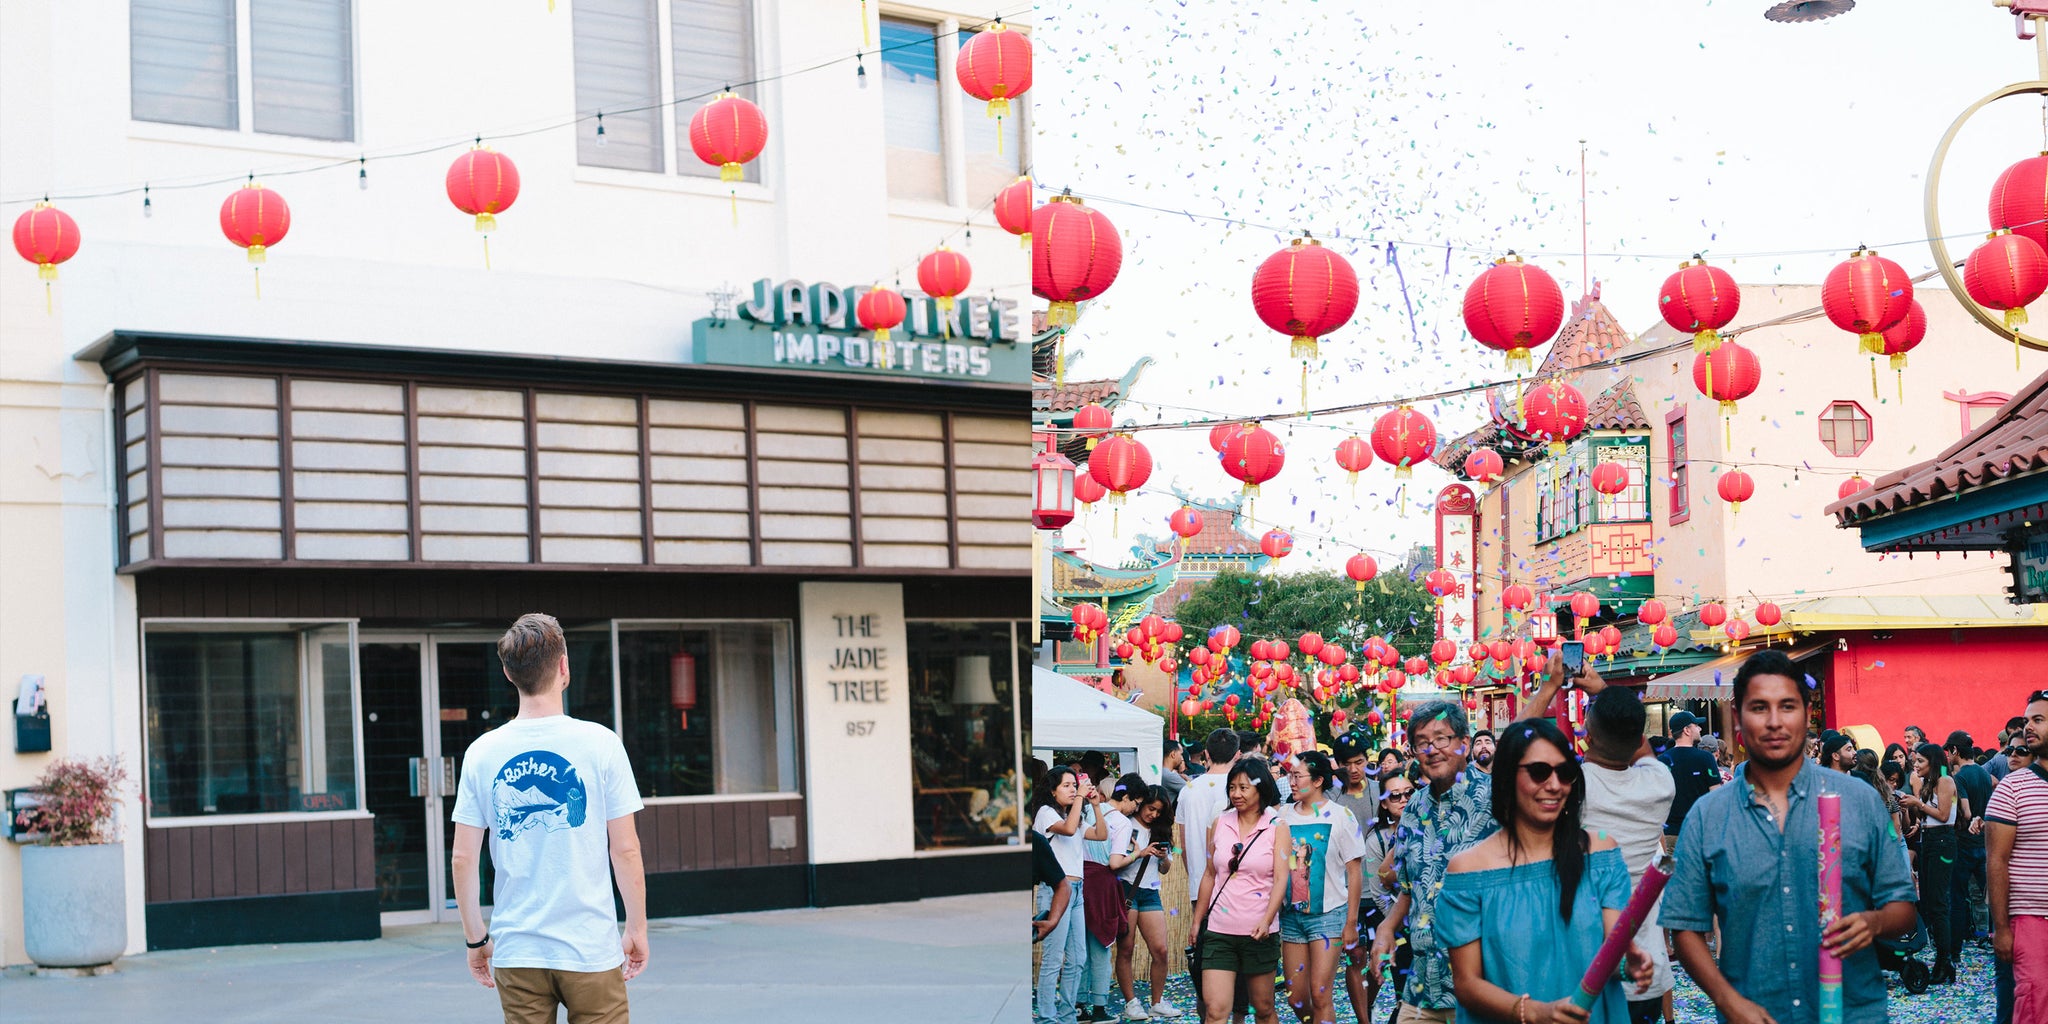 Exploring Chinatown in LA by Sean Martin for Bather